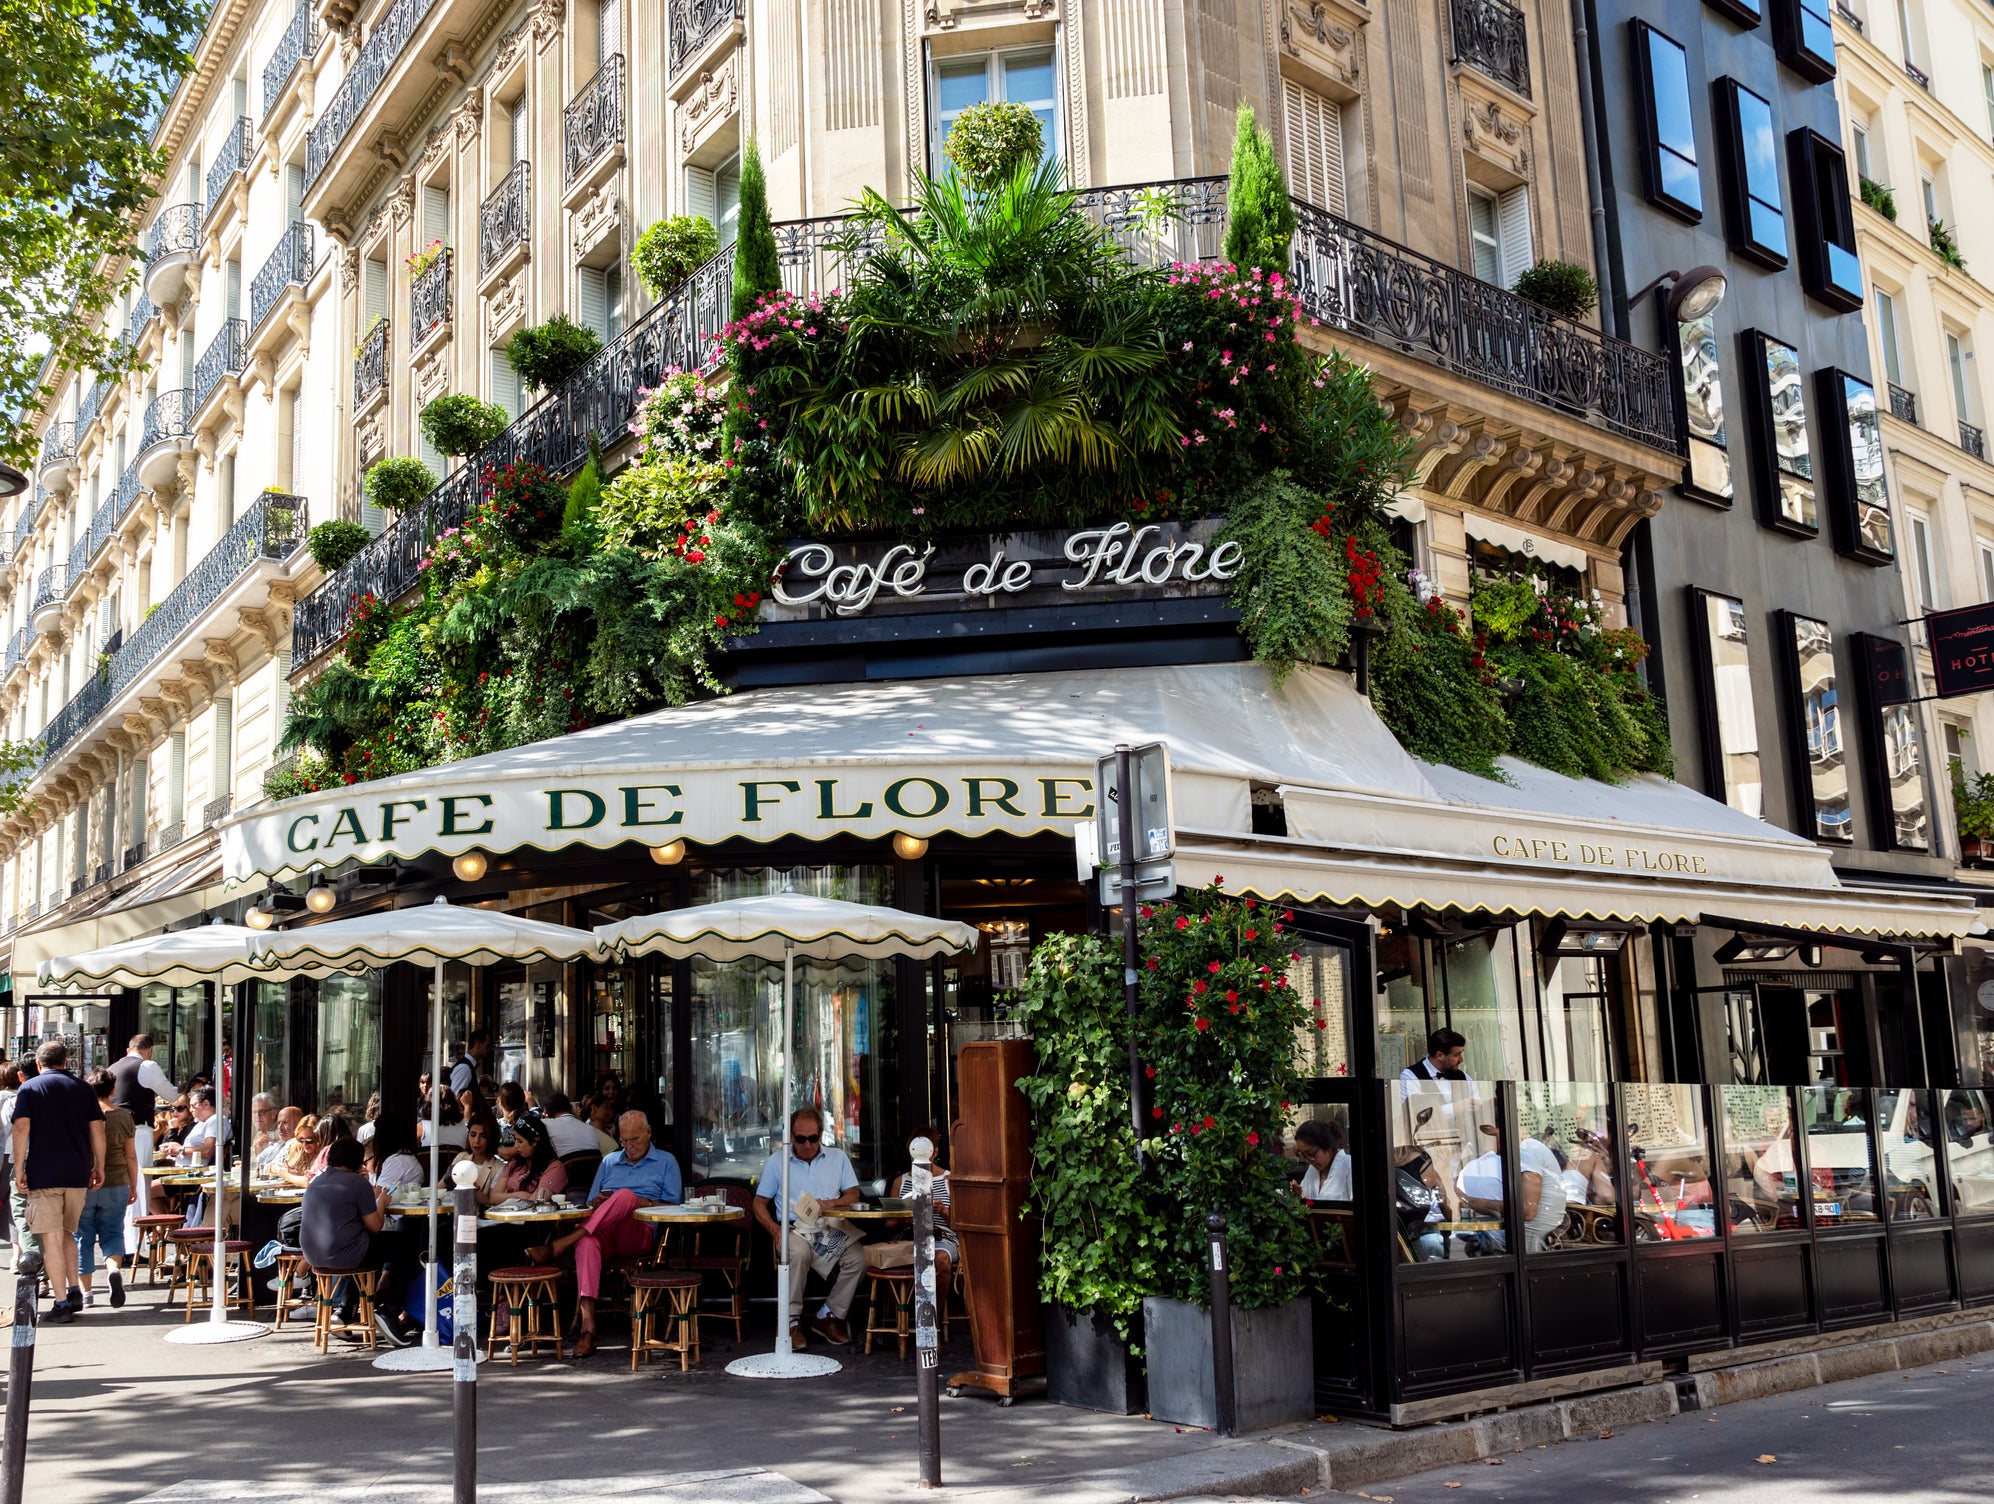 The Cafe De Flore, one of the oldest coffeehouses in Paris